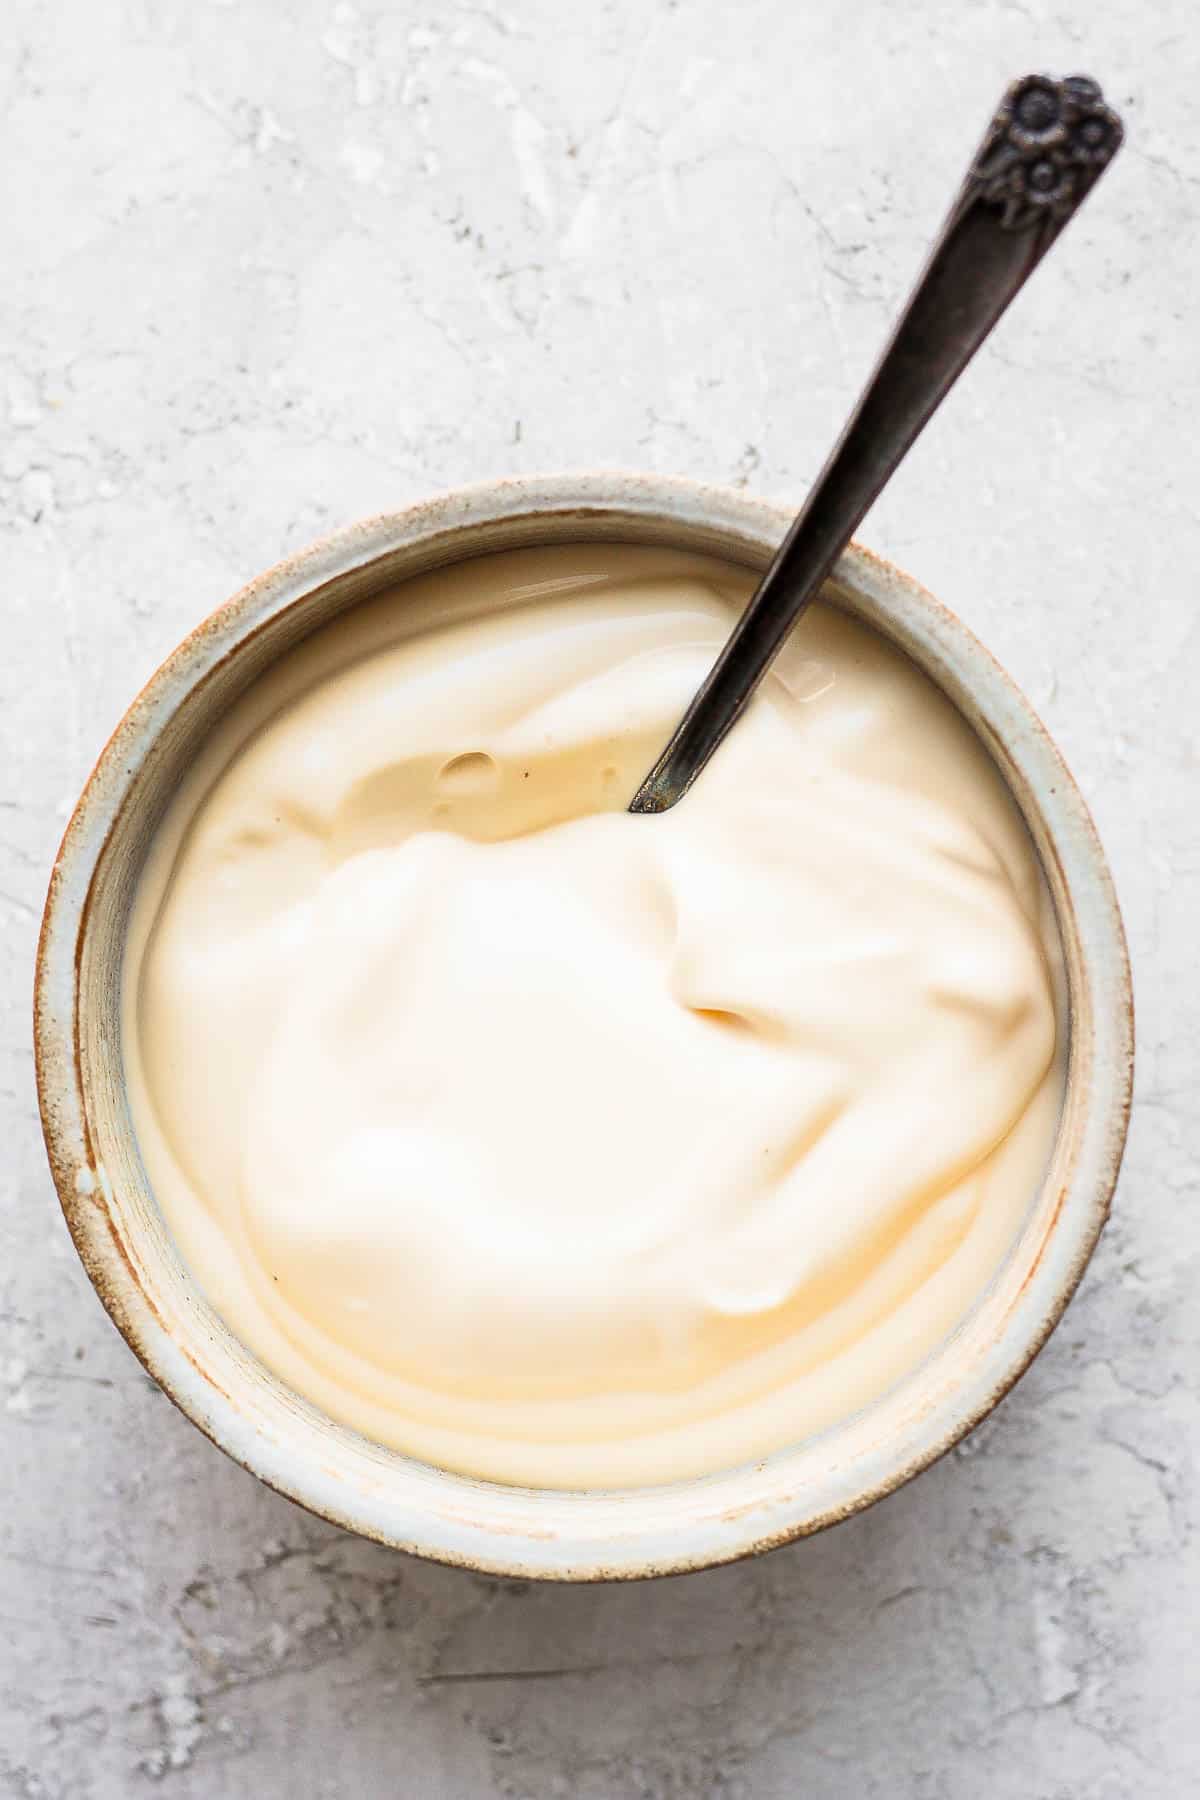 Overhead shot of a bowl of mayonnaise with spoon dipped inside.